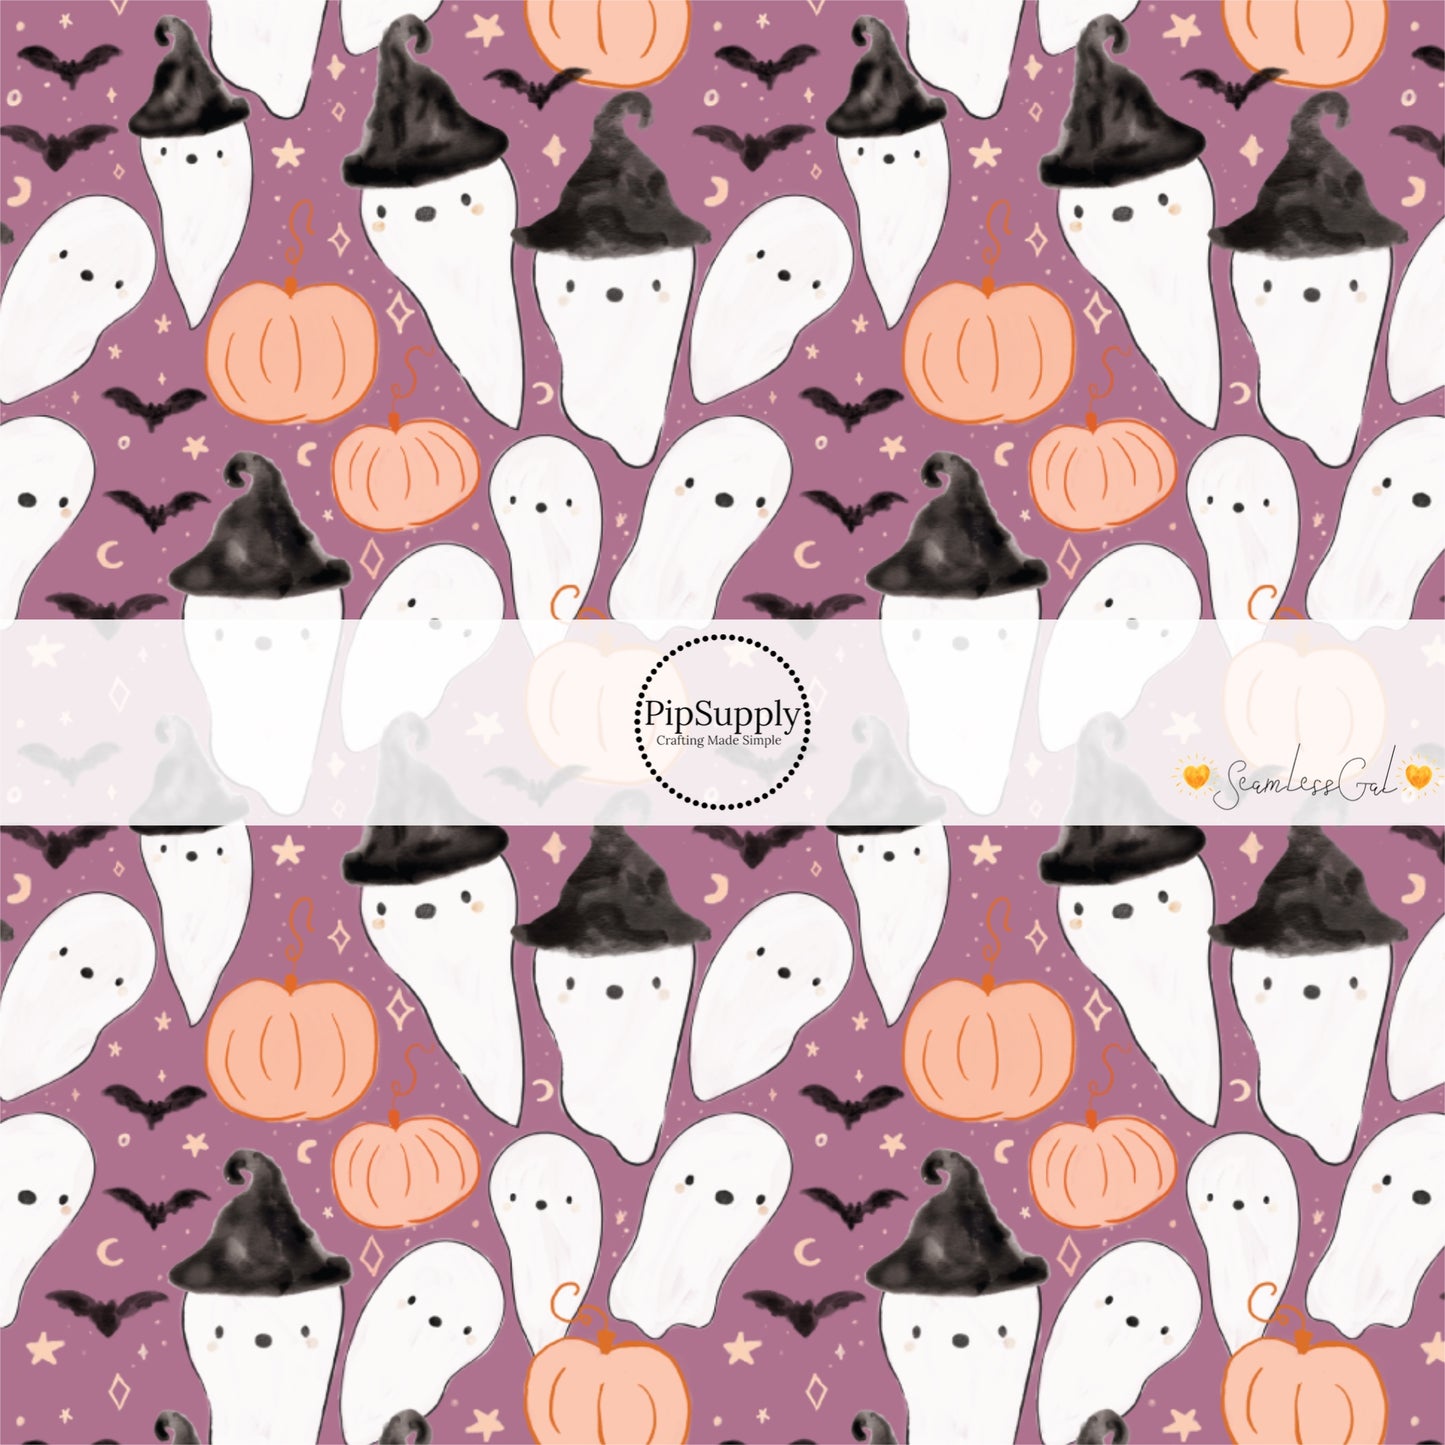 Witchy ghosts with pumpkins and bats on purple hair bow strips